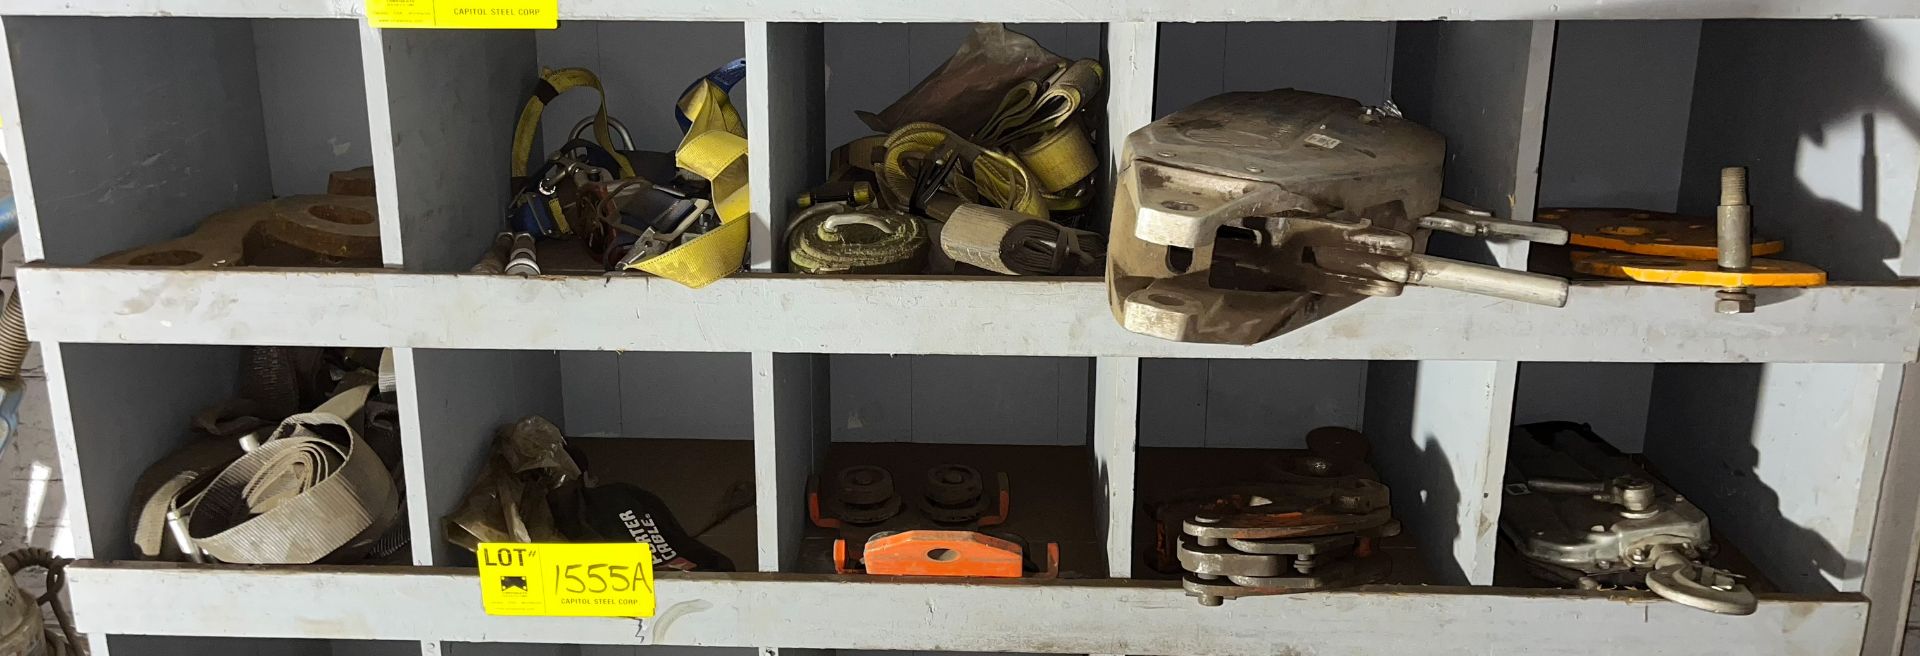 LOT/ CONTENTS OF SHELVES - FALL ARREST SAFETY SYSTEM & LIFTING COMPONENTS INCLUDING TIRFORS AND